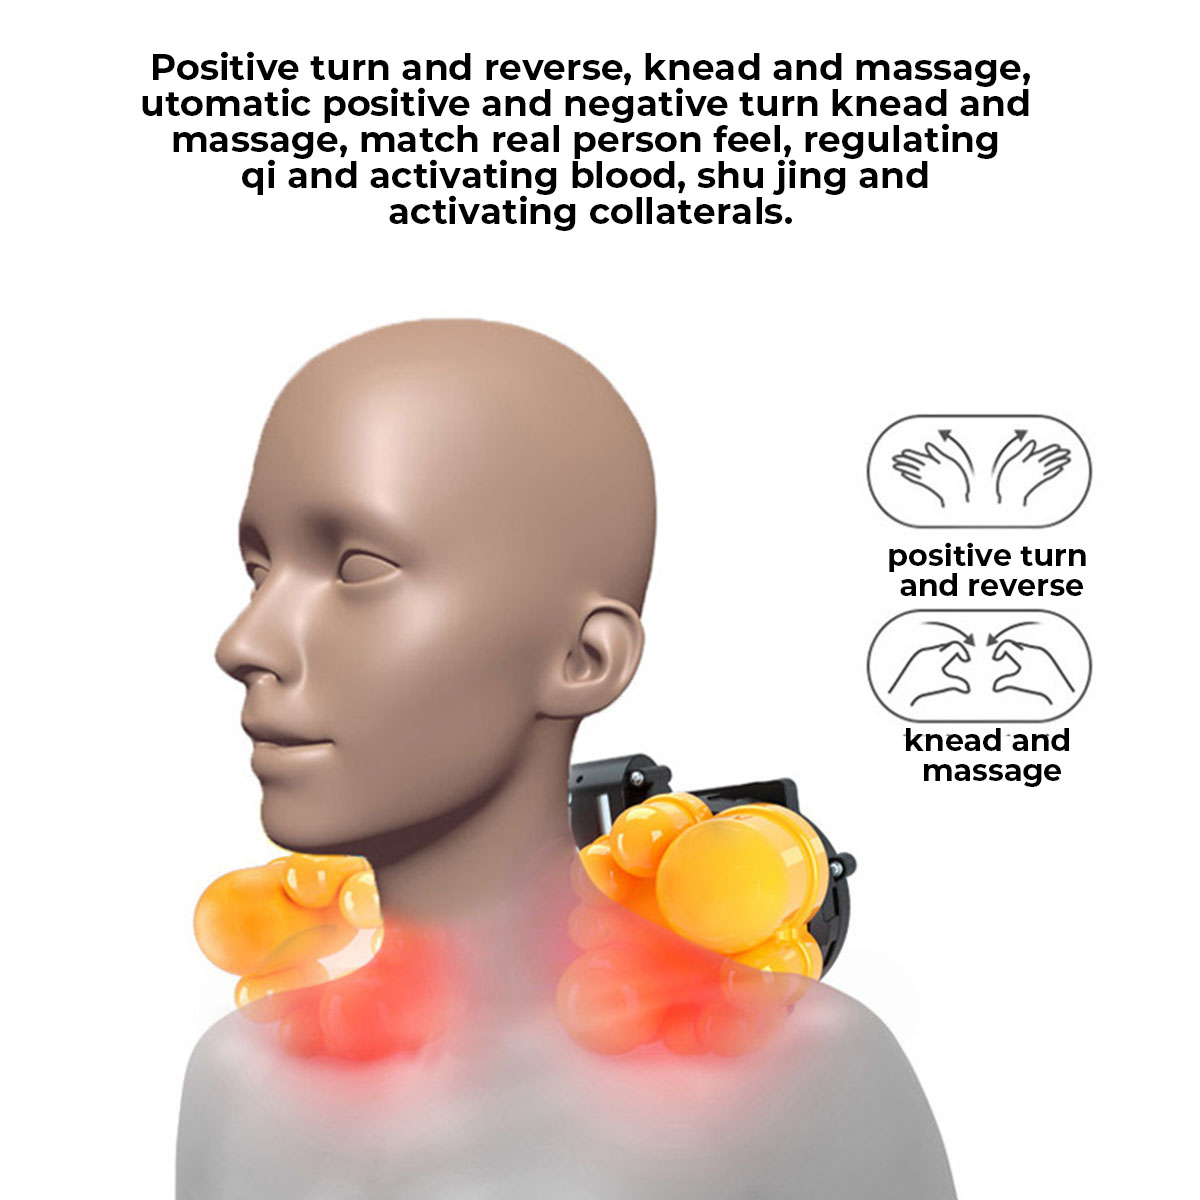 16-Heads-Neck-Massage-Pillow-3-Gears-Heating-Magnetic-Therapy-Massage-Device-for-Neck-Waist-Abdomina-1804675-3